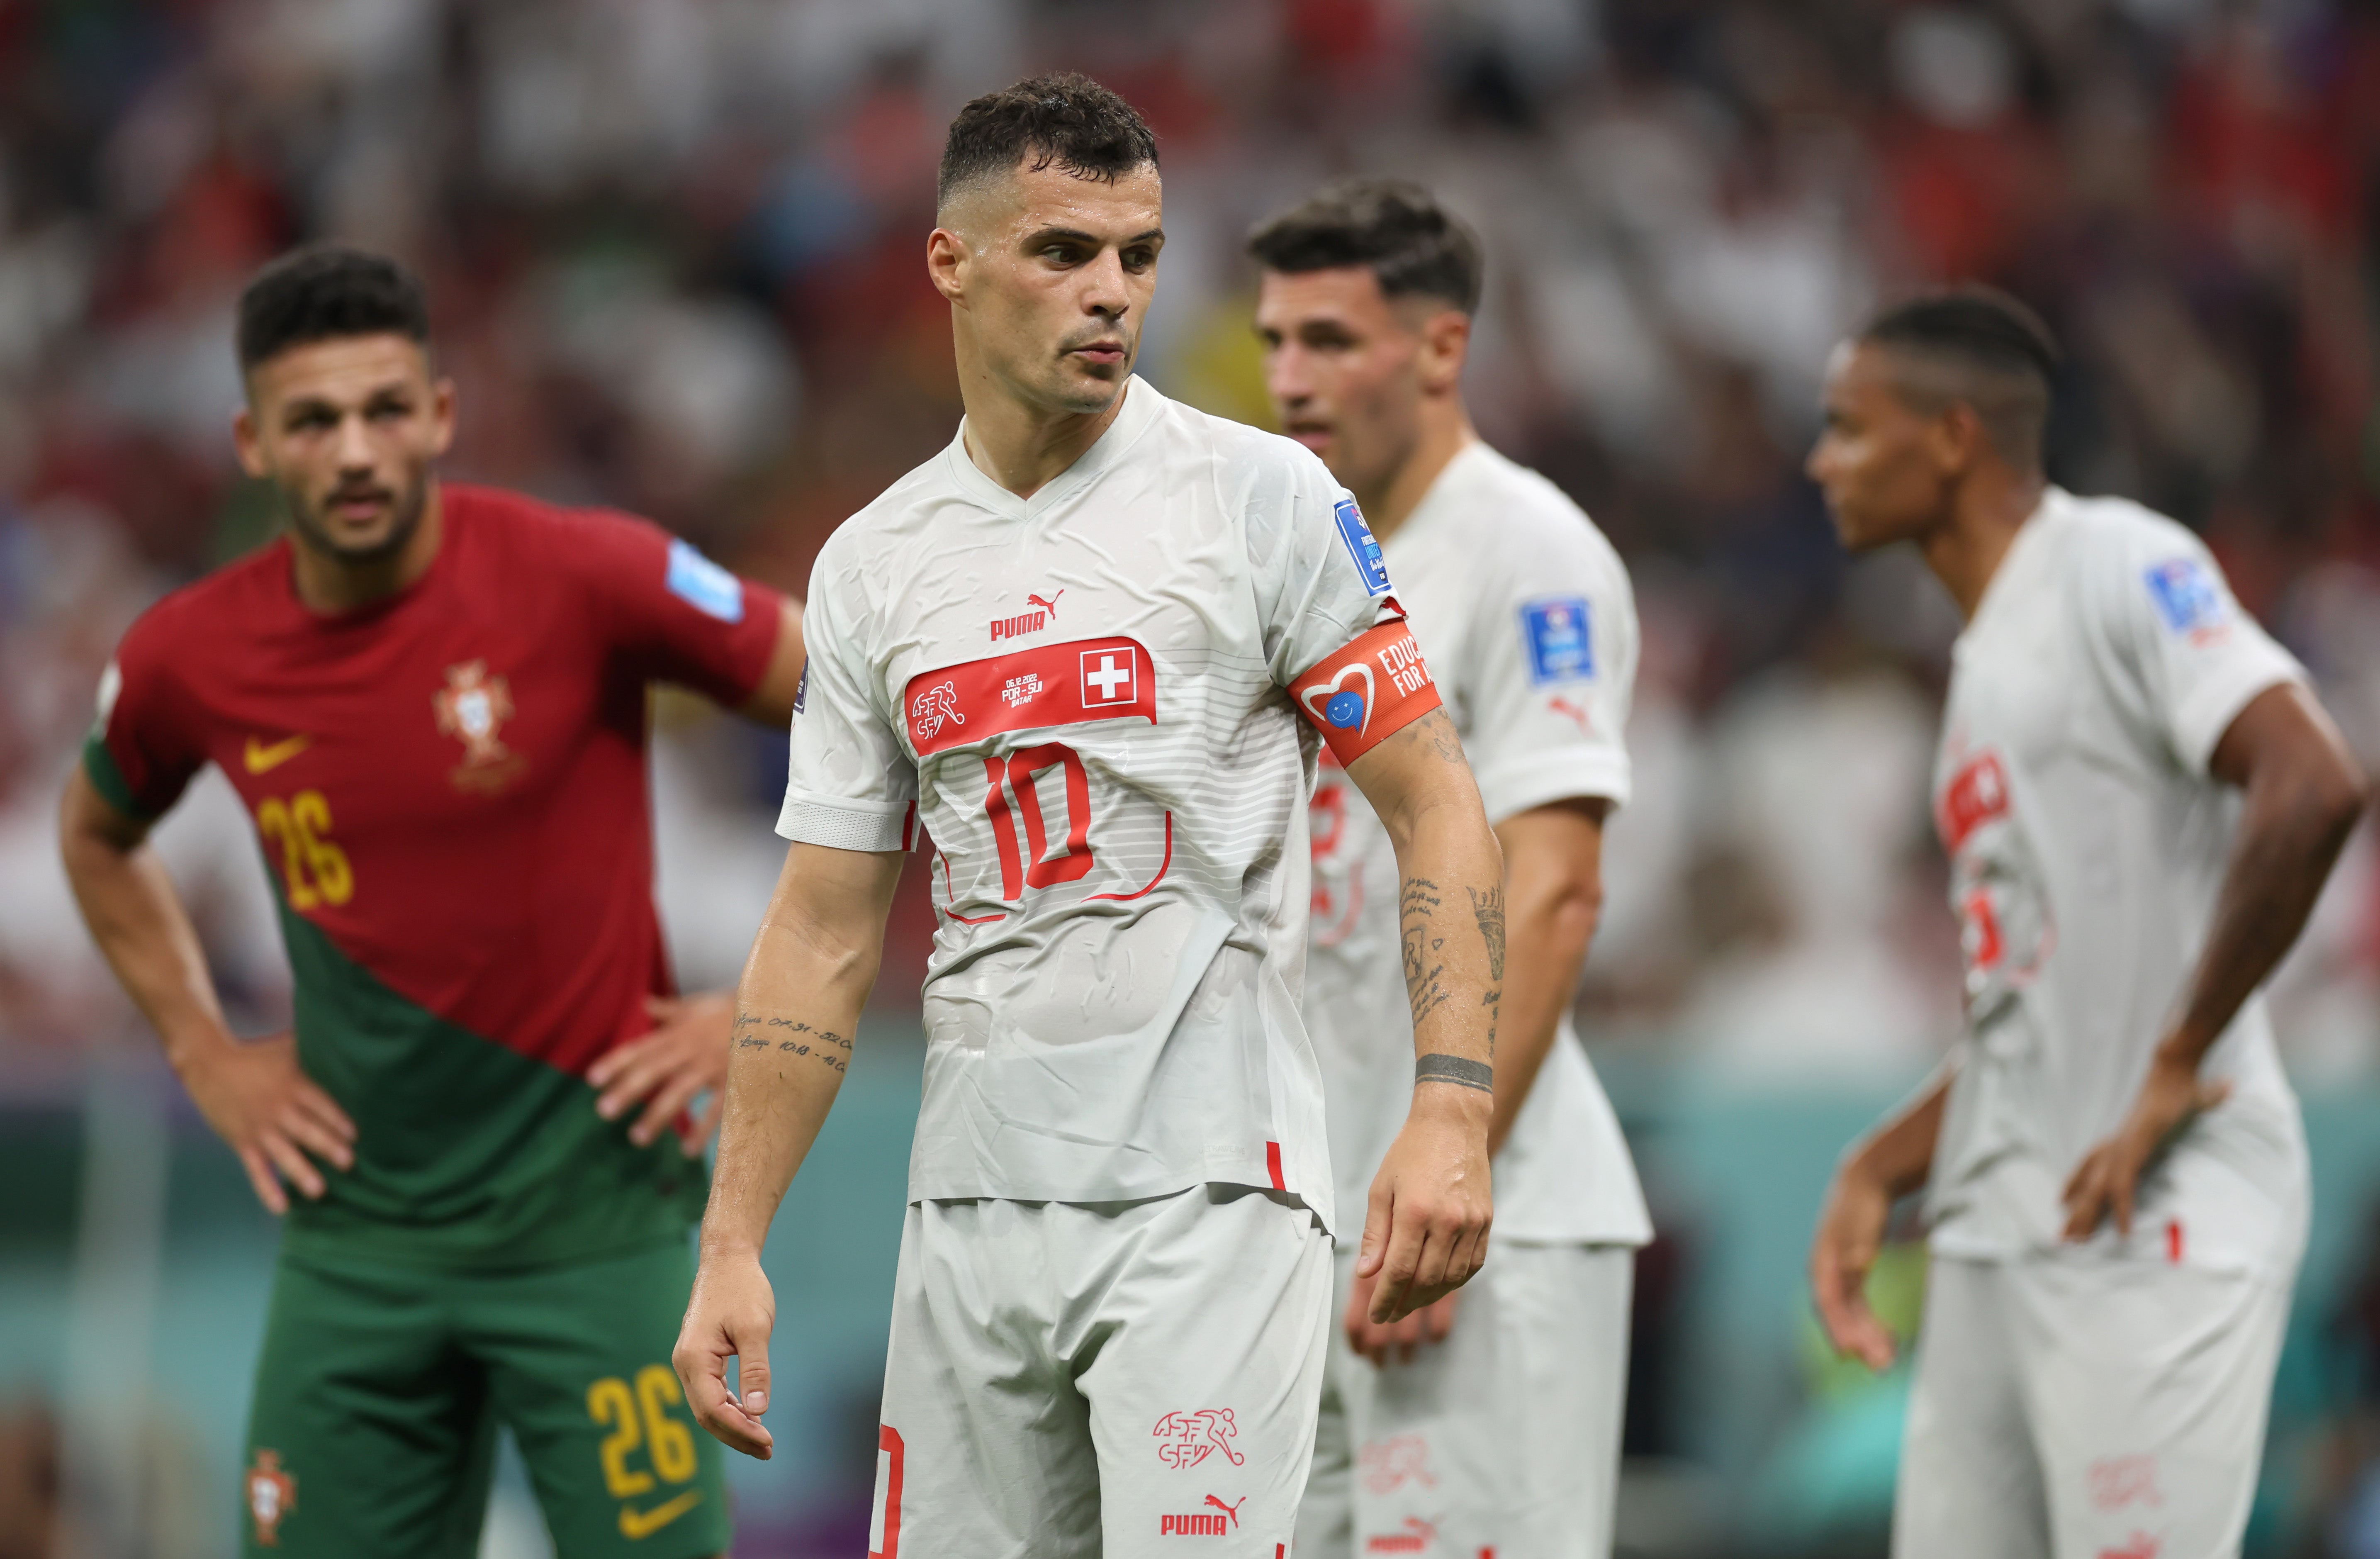 Granit Xhaka was powerless to stop Portugal’s midfield on Tuesday night